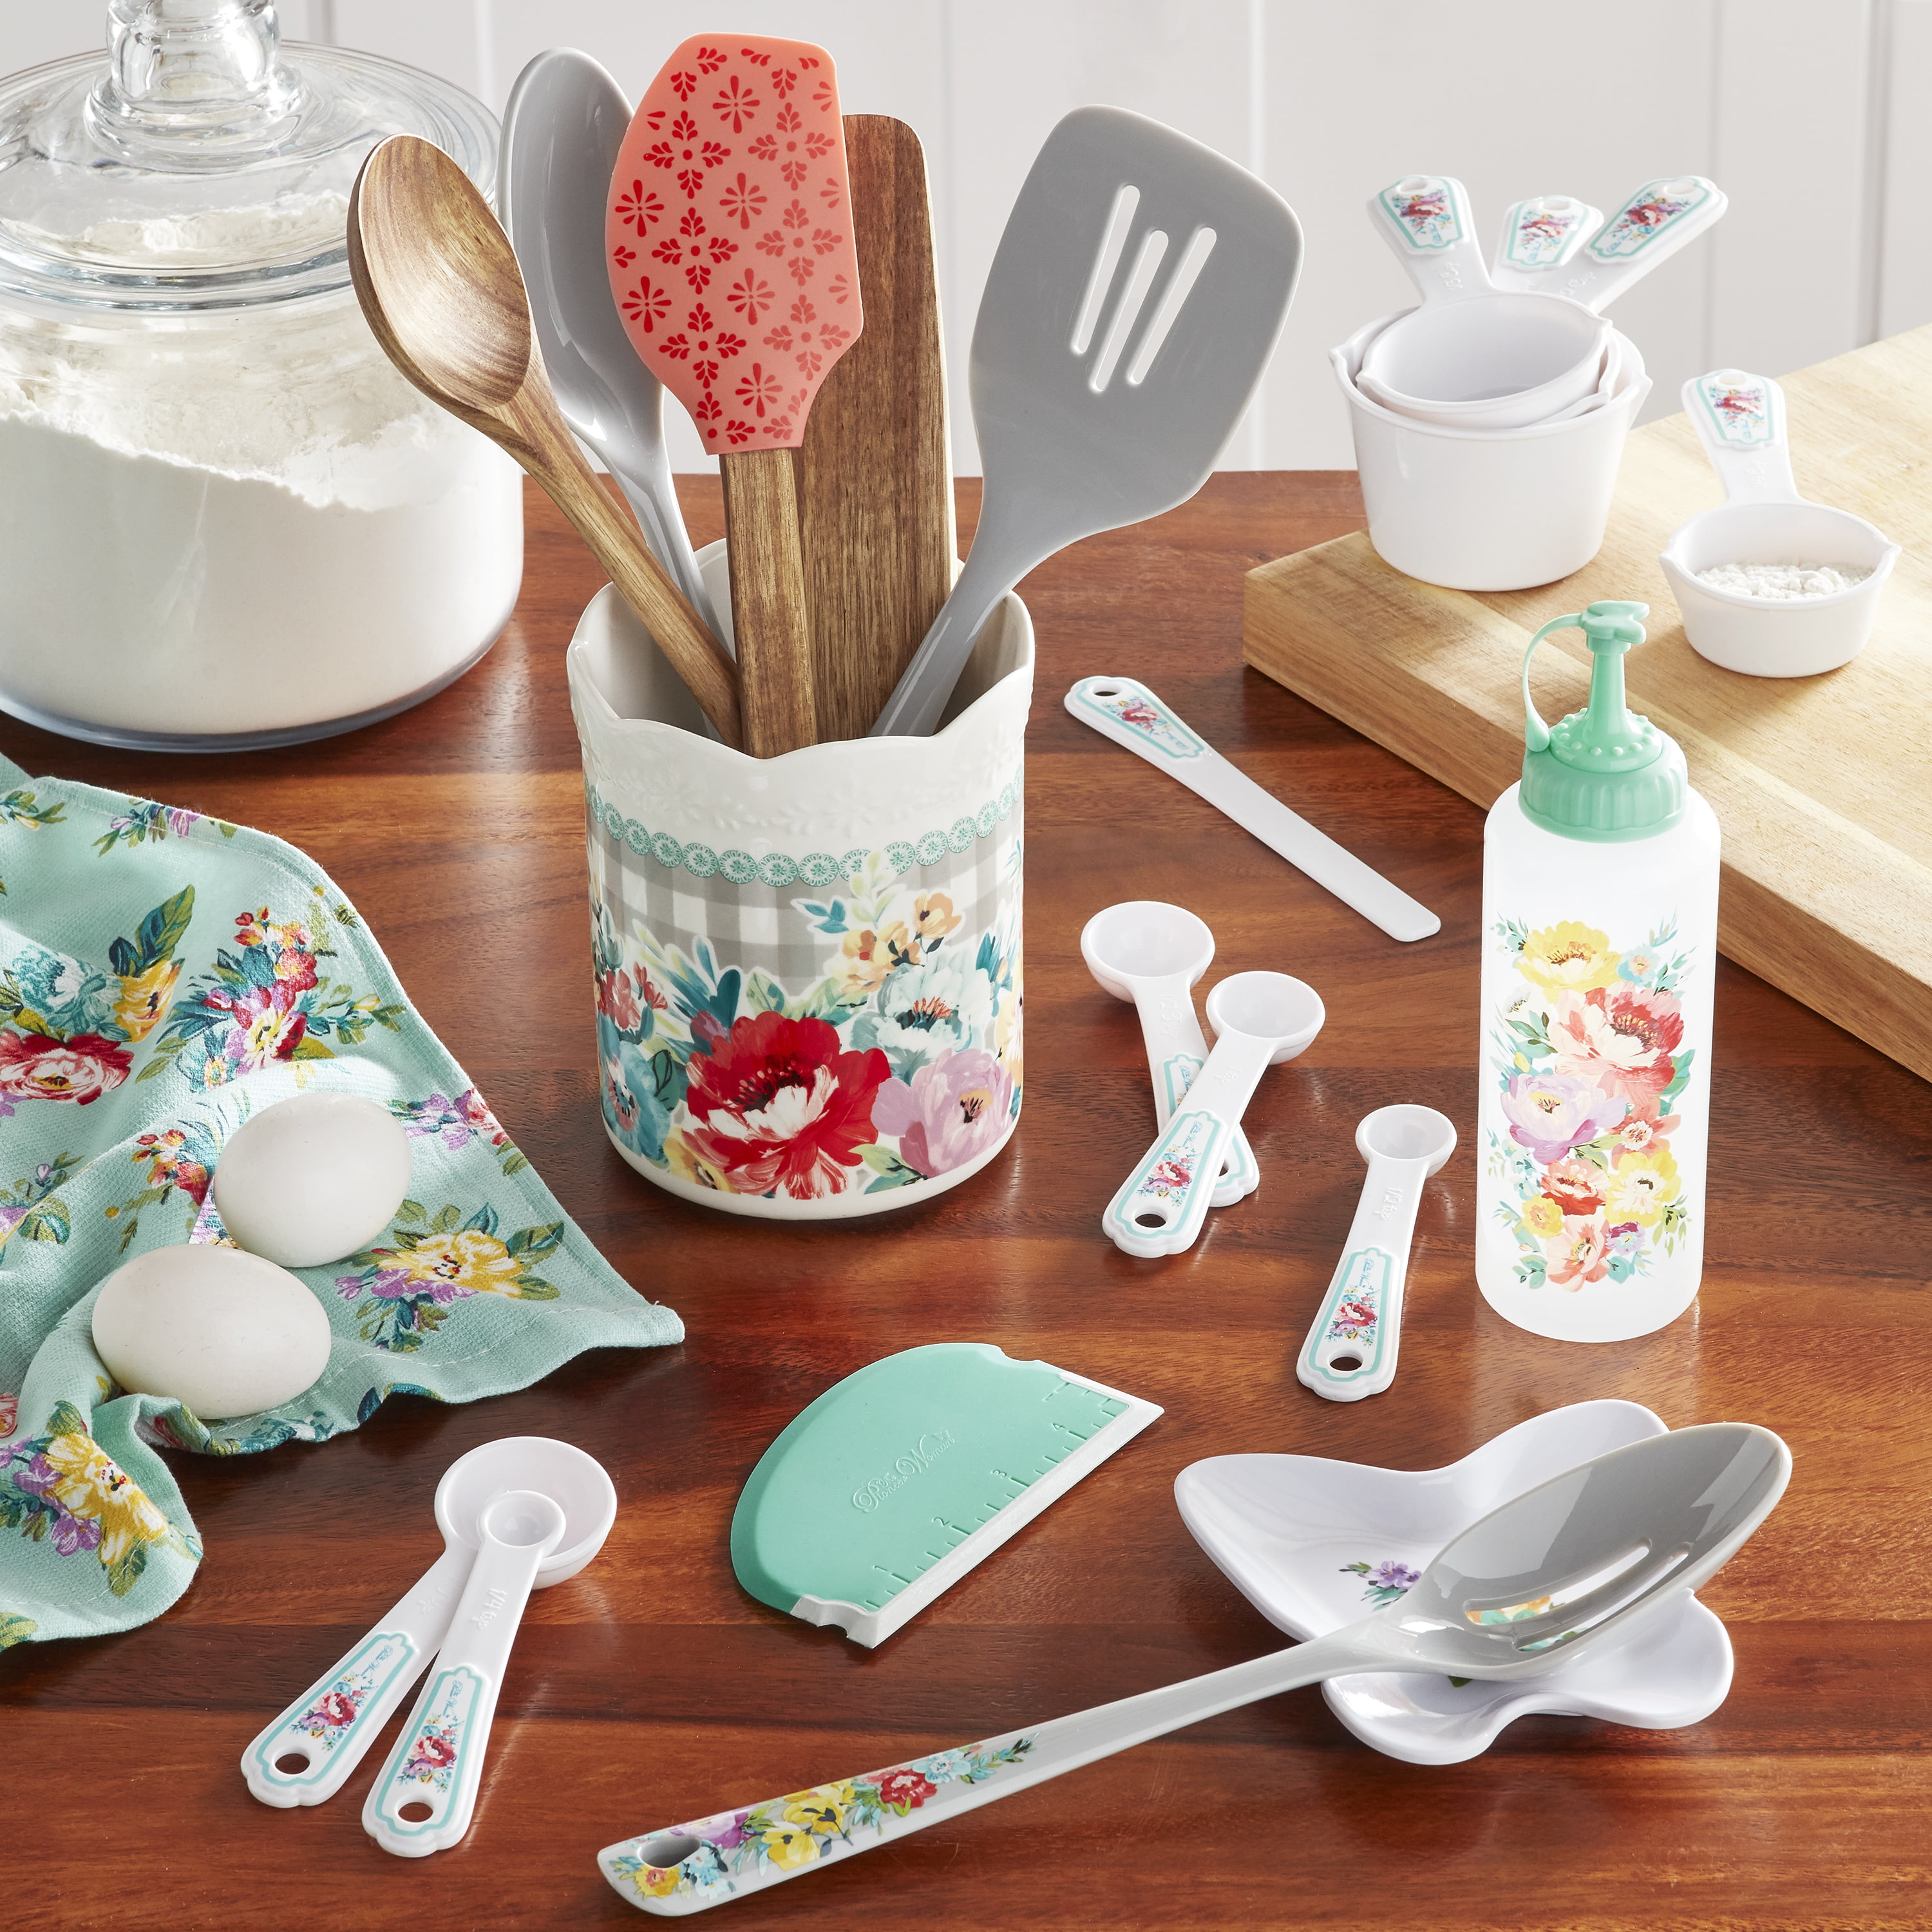 The Pioneer Woman Silicone Kitchen Utensils Set with Acacia Wood Handle - Gray - 1 Each